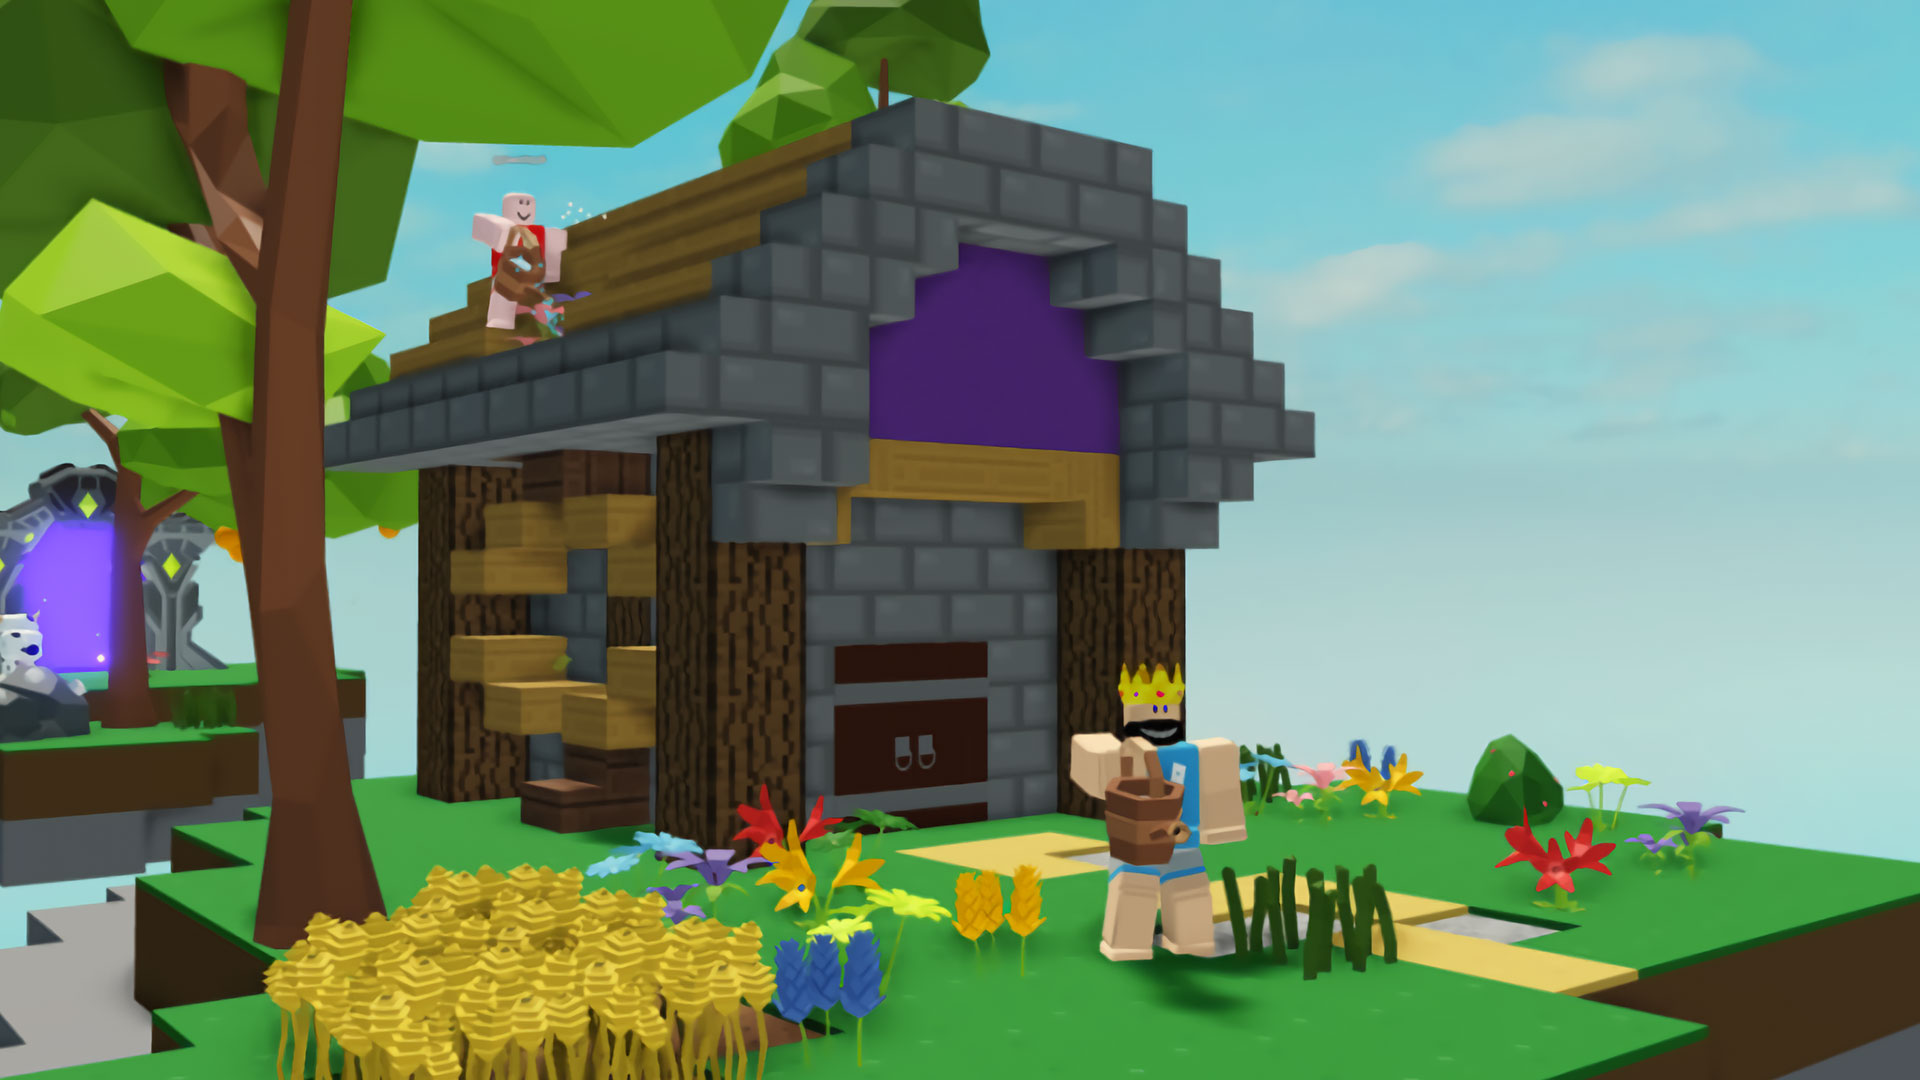 Roblox Islands gets some major system changes in new update Hard Guides